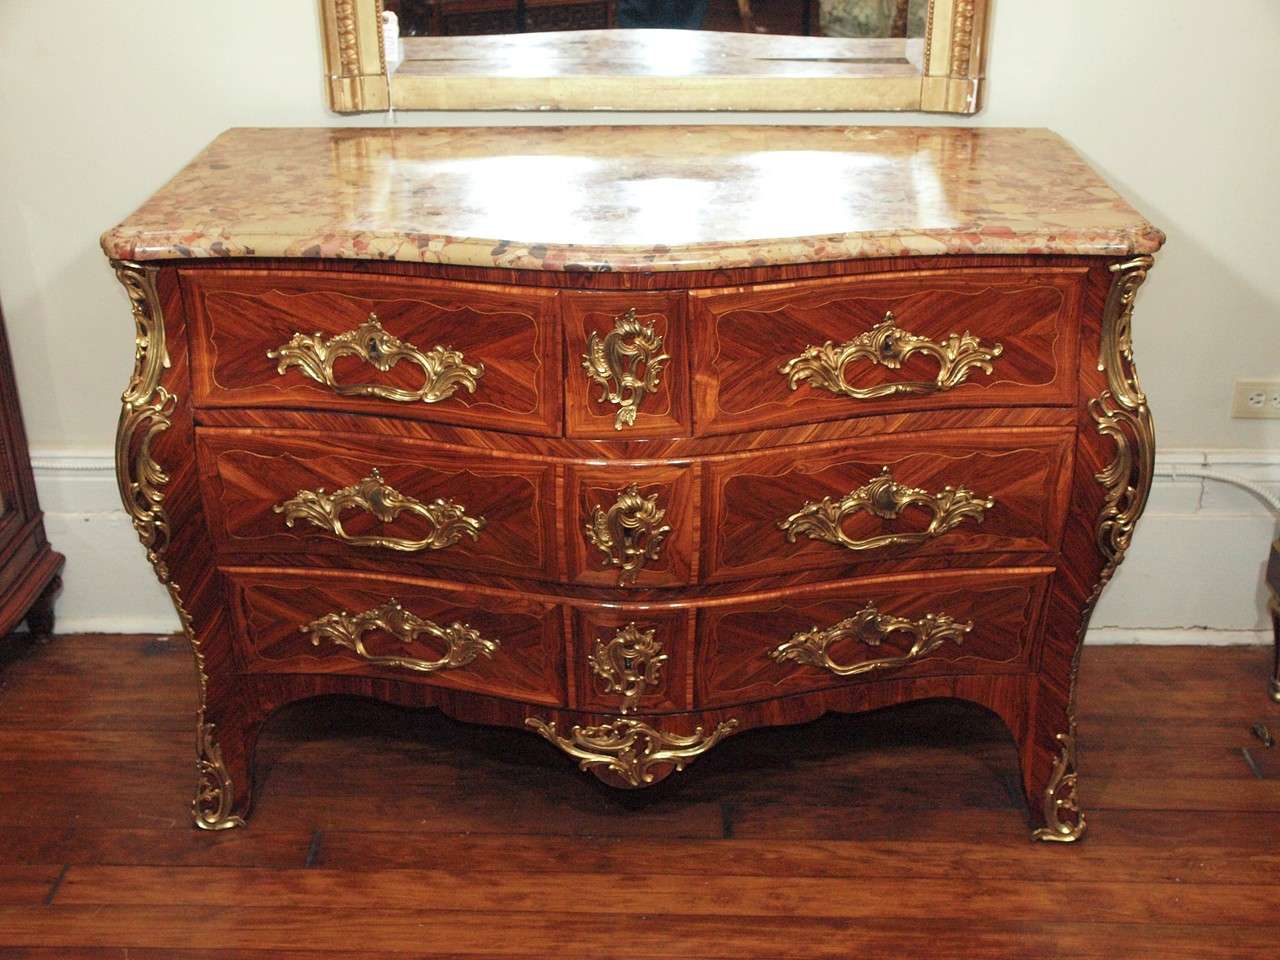 This commode makes one realize the excellence in craftsmanship that many of the French woodworkers possessed. Kingwood, violet wood and rosewood comprise the inlays. The marble top is in excellent condition. A truly marvellous antique.